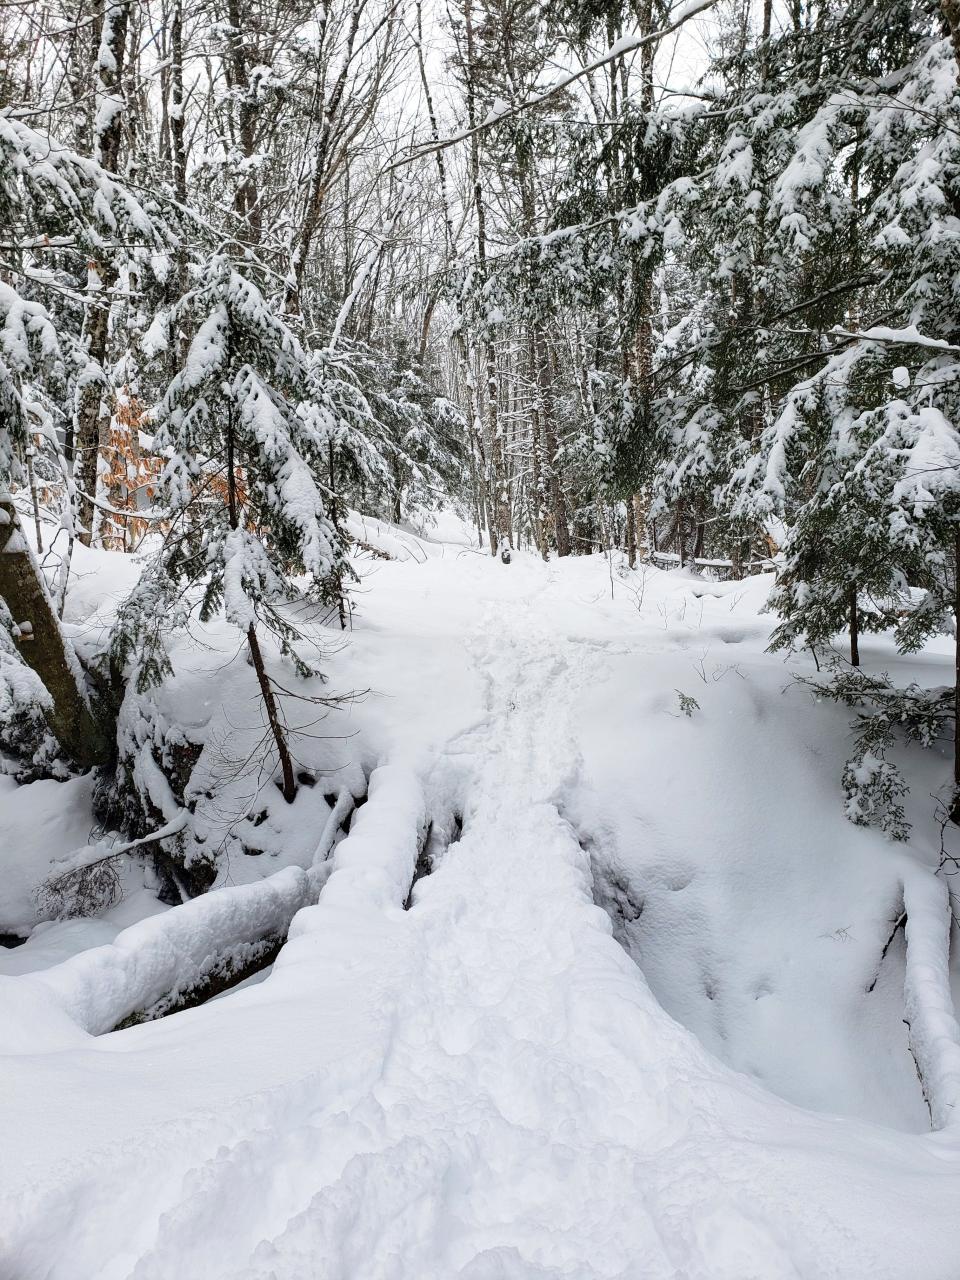 There isn't an official trail to the Eben ice caves in the Hiawatha National Forest, but the caves are popular enough that there's usually an established path to follow in the winter.